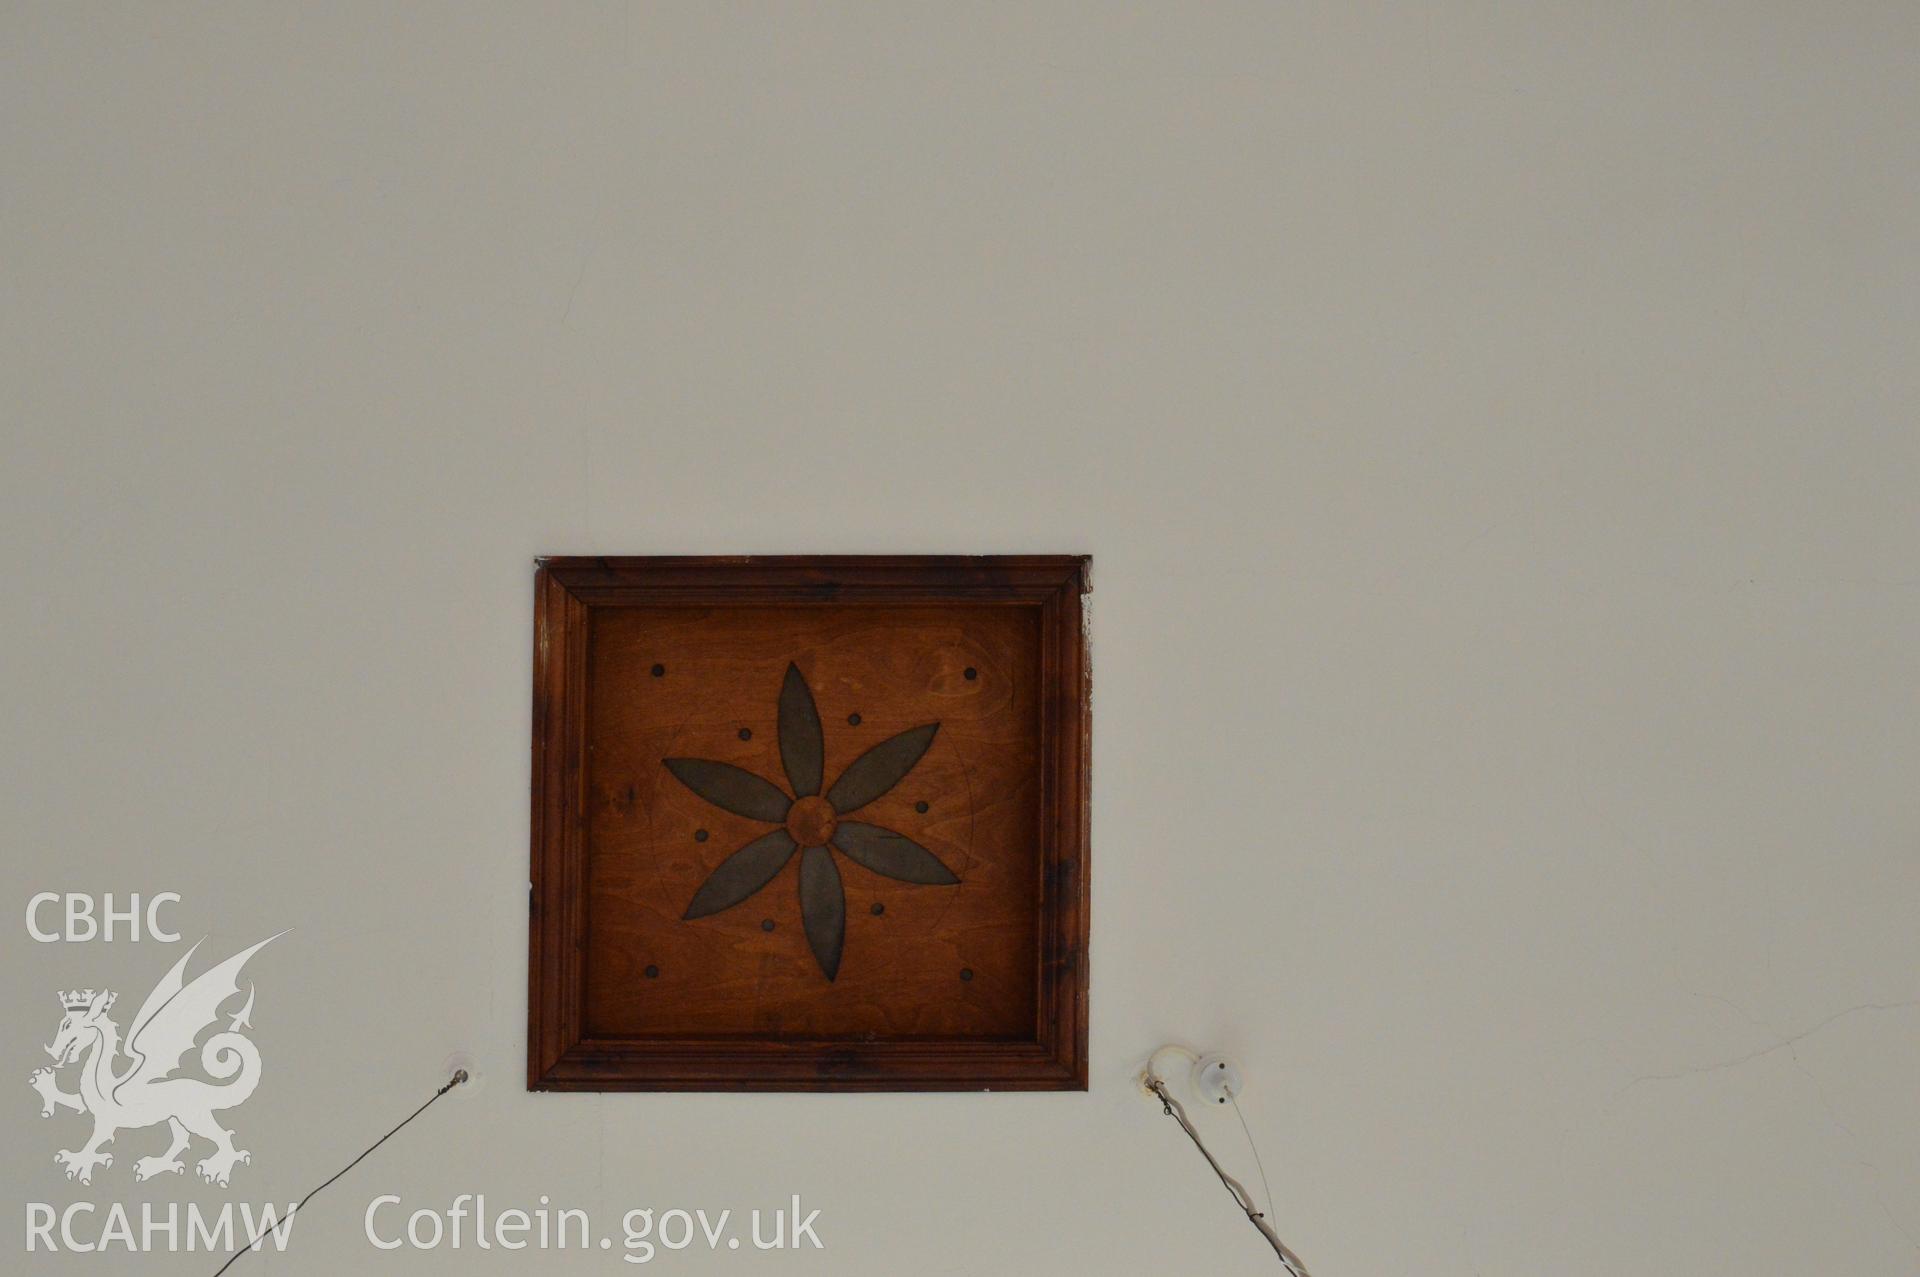 Internal view of ceiling detail. Digital colour photograph taken during CPAT Project 2396 at the United Reformed Church in Northop. Prepared by Clwyd Powys Archaeological Trust, 2018-2019.